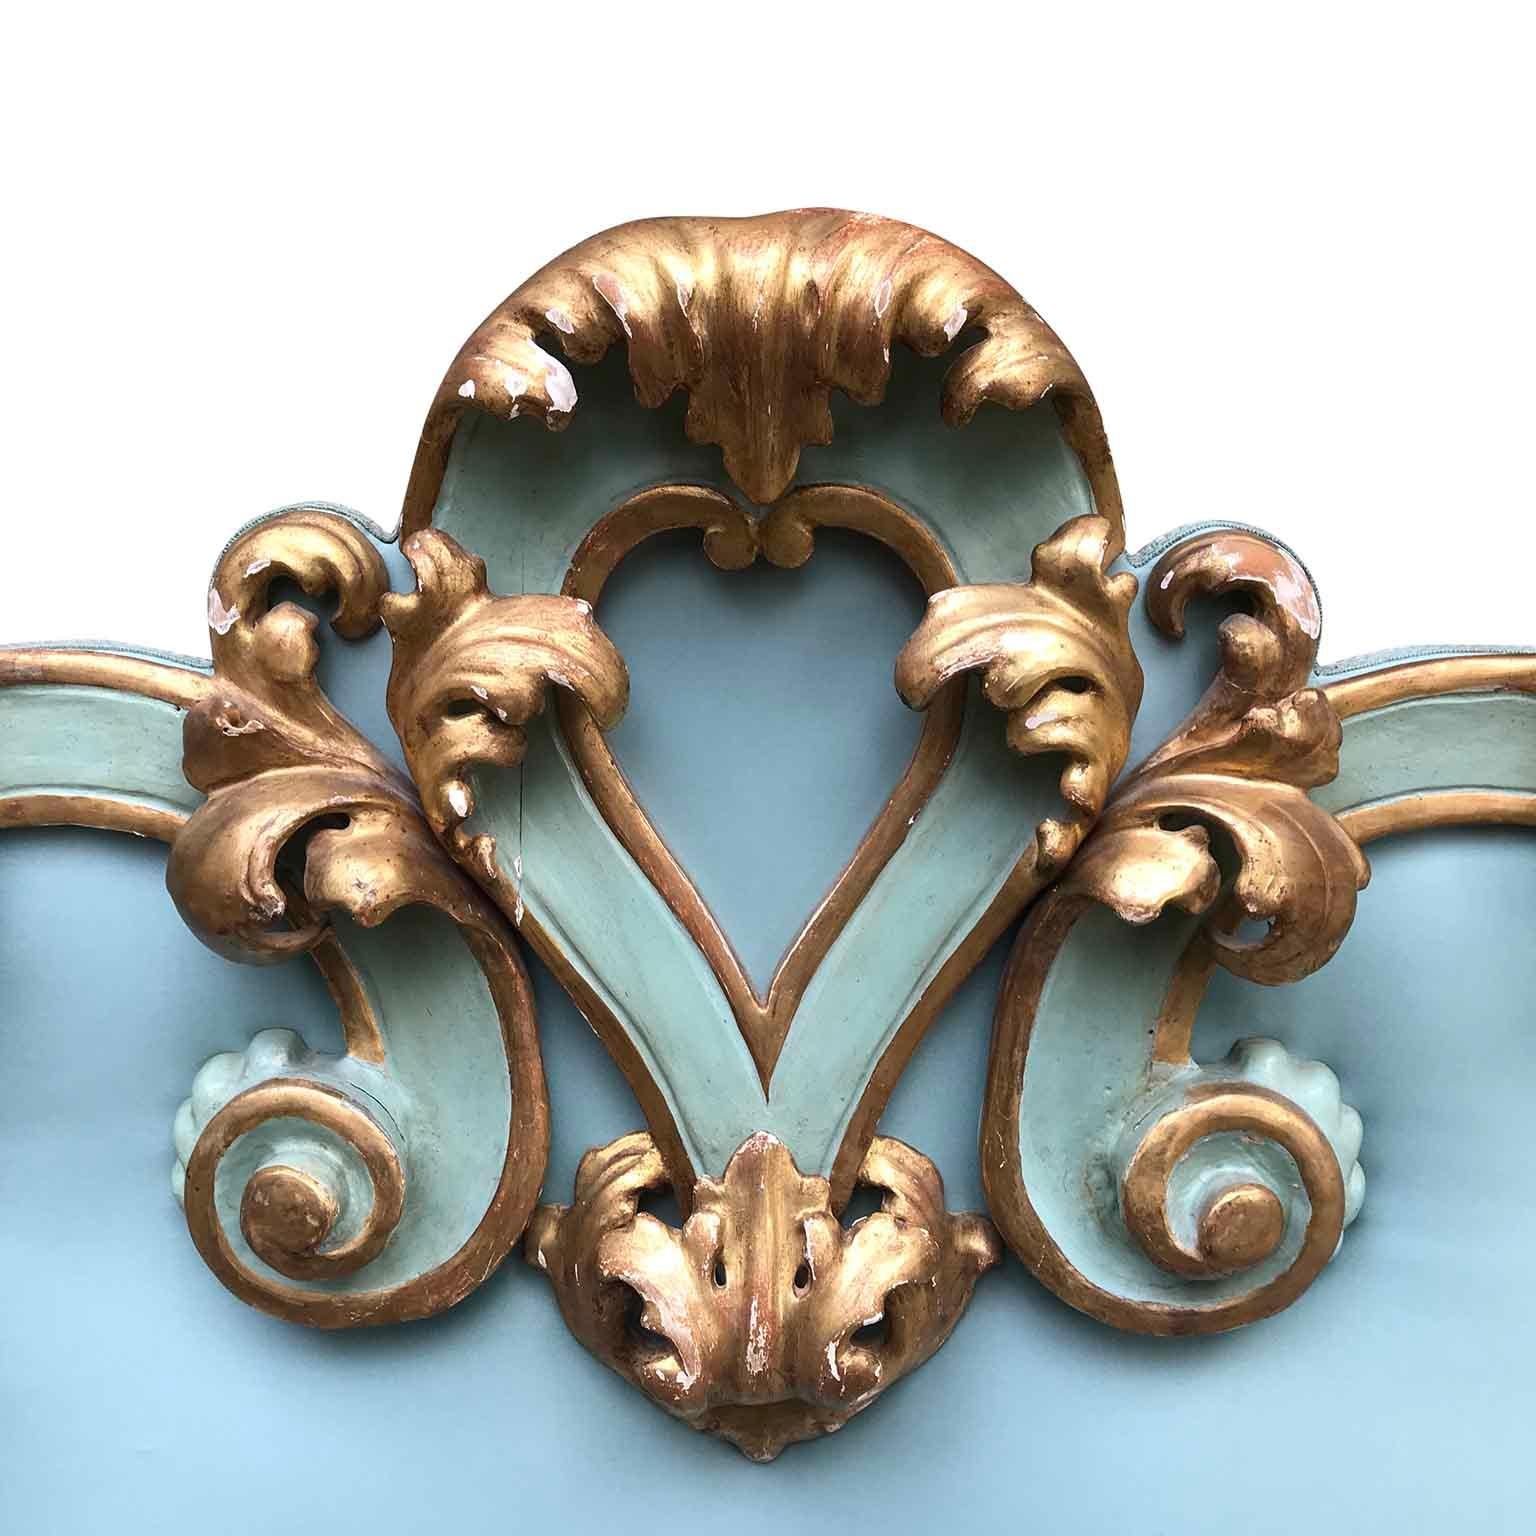 Italian 20th century Baroque style decorative gilt elements mounted onto an upholstered headboard. The headboard fits a double bed and displays a lovely hand carved wooden frame with scrolled foliate movements, original gold-leaf gilding and